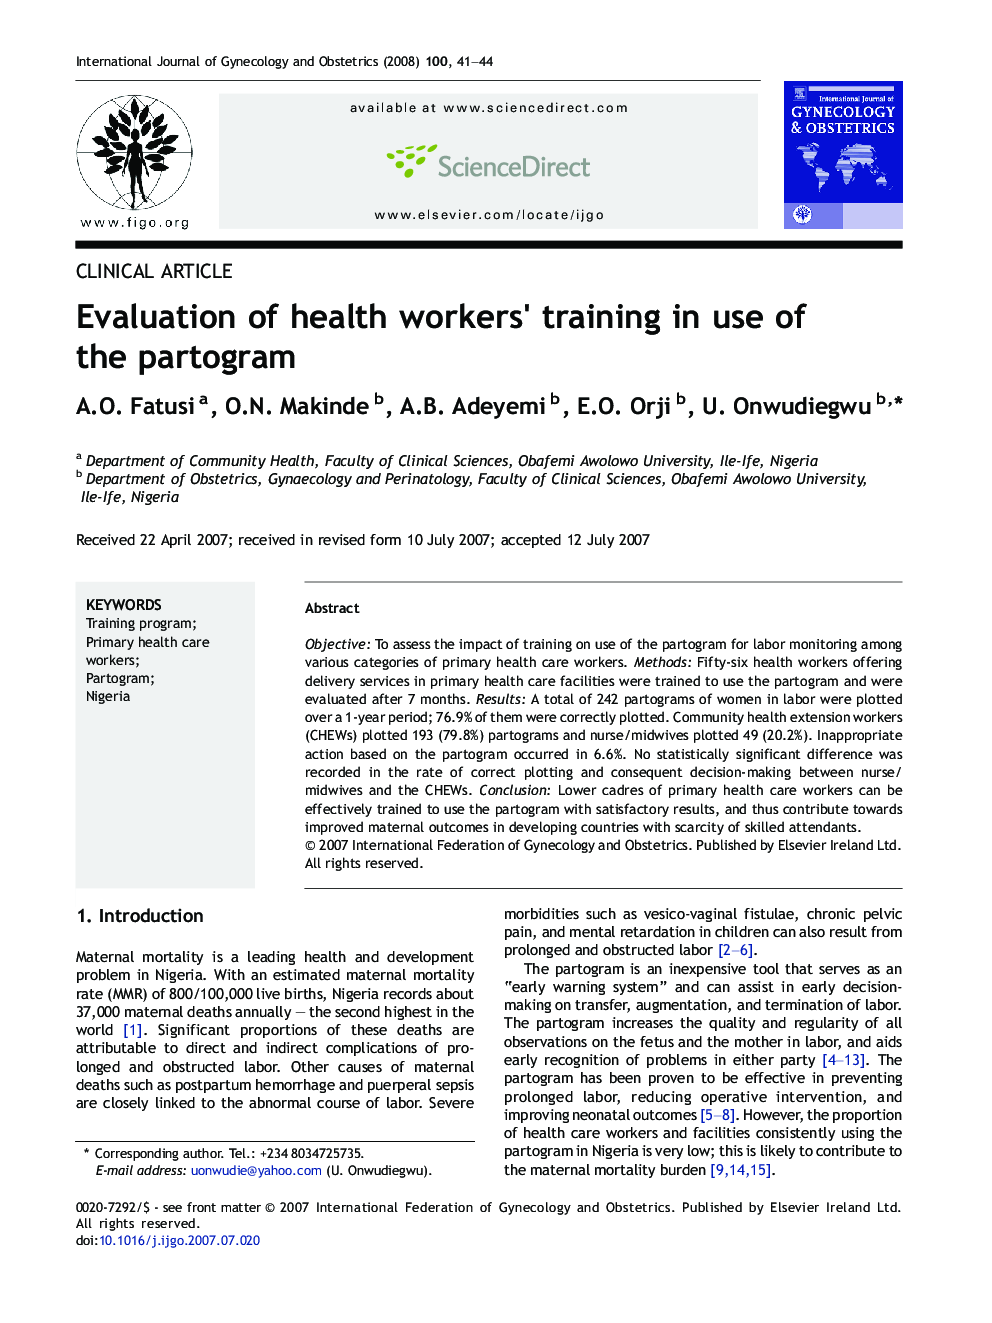 Evaluation of health workers' training in use of the partogram